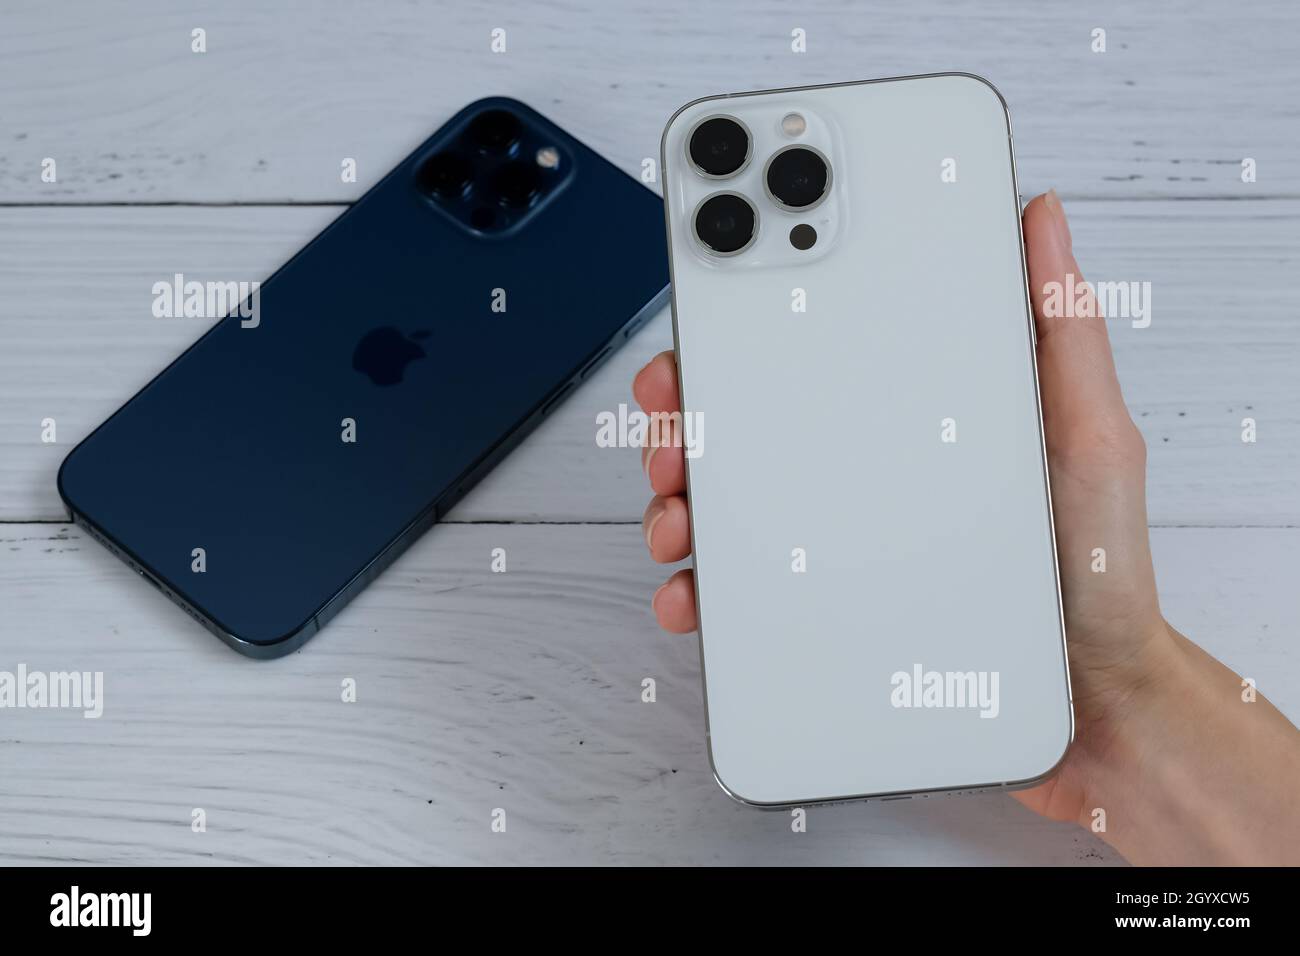 iPhone 13 Pro Max in Silver and iPhone 12 Pro Max in Pacific Blue Stock Photo